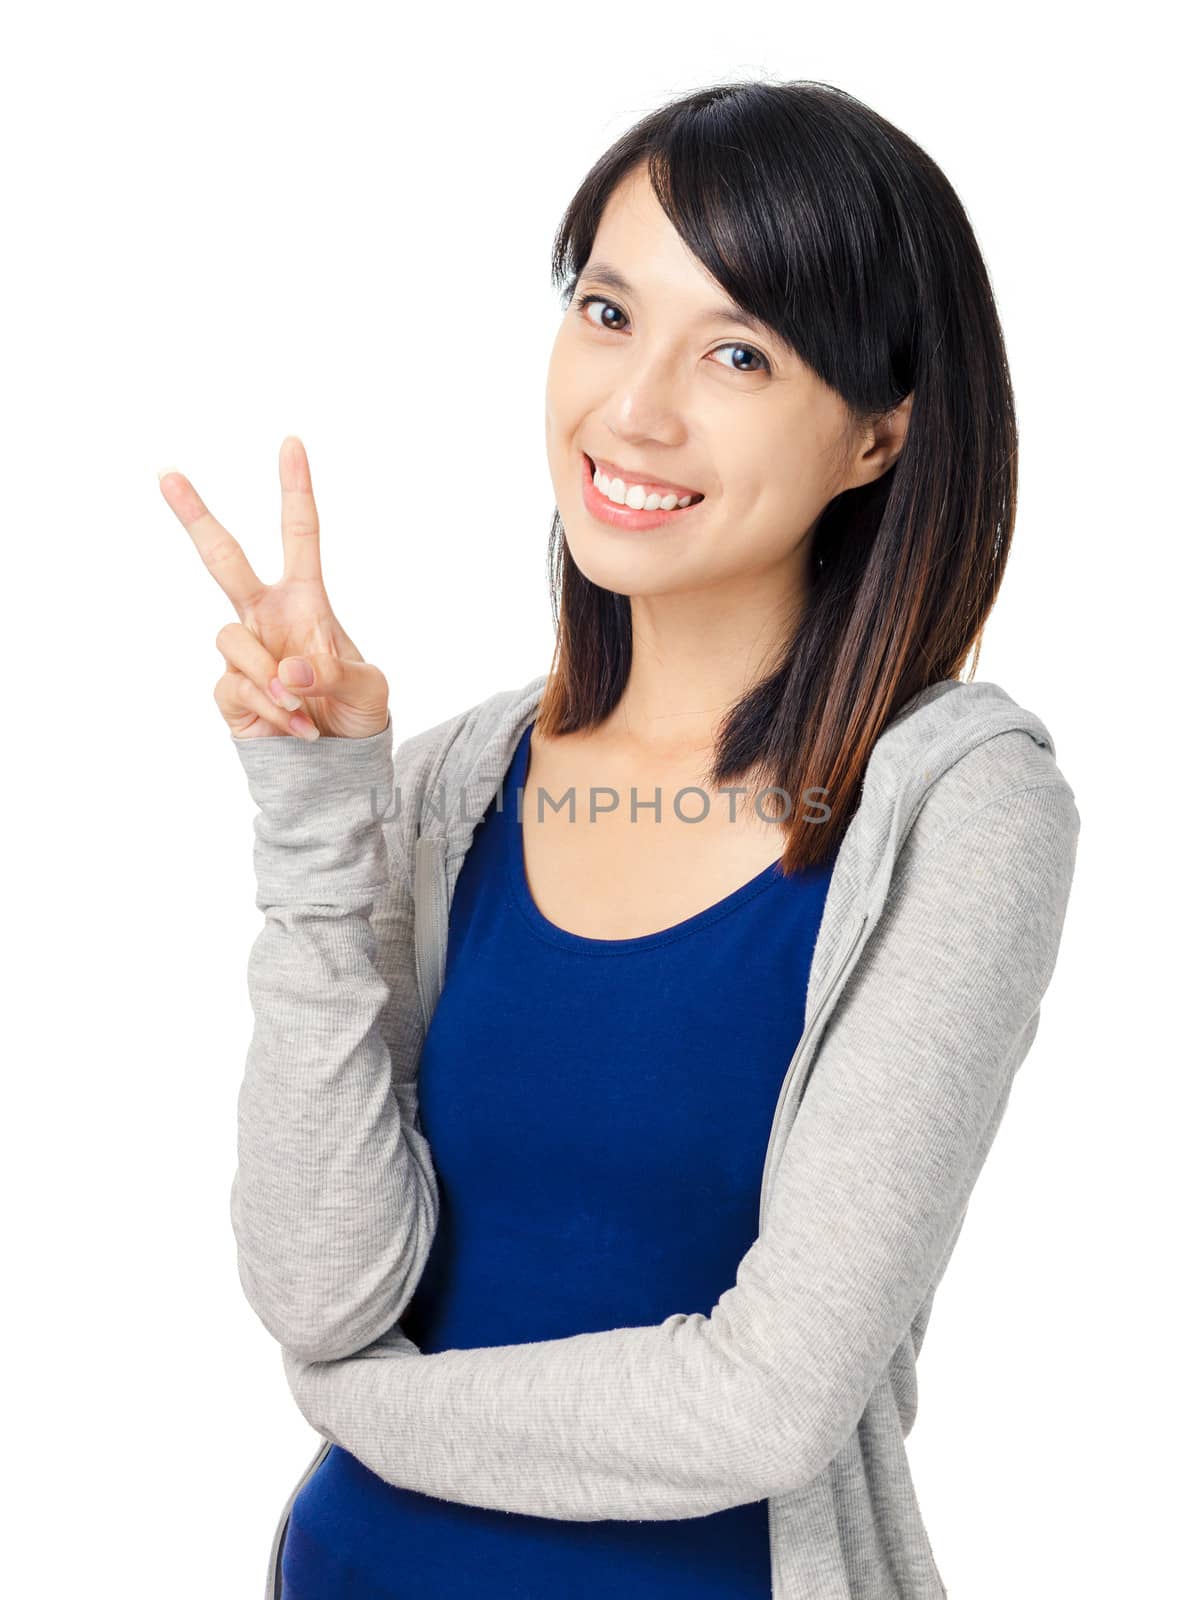 young girl show victory sign isolated on white background